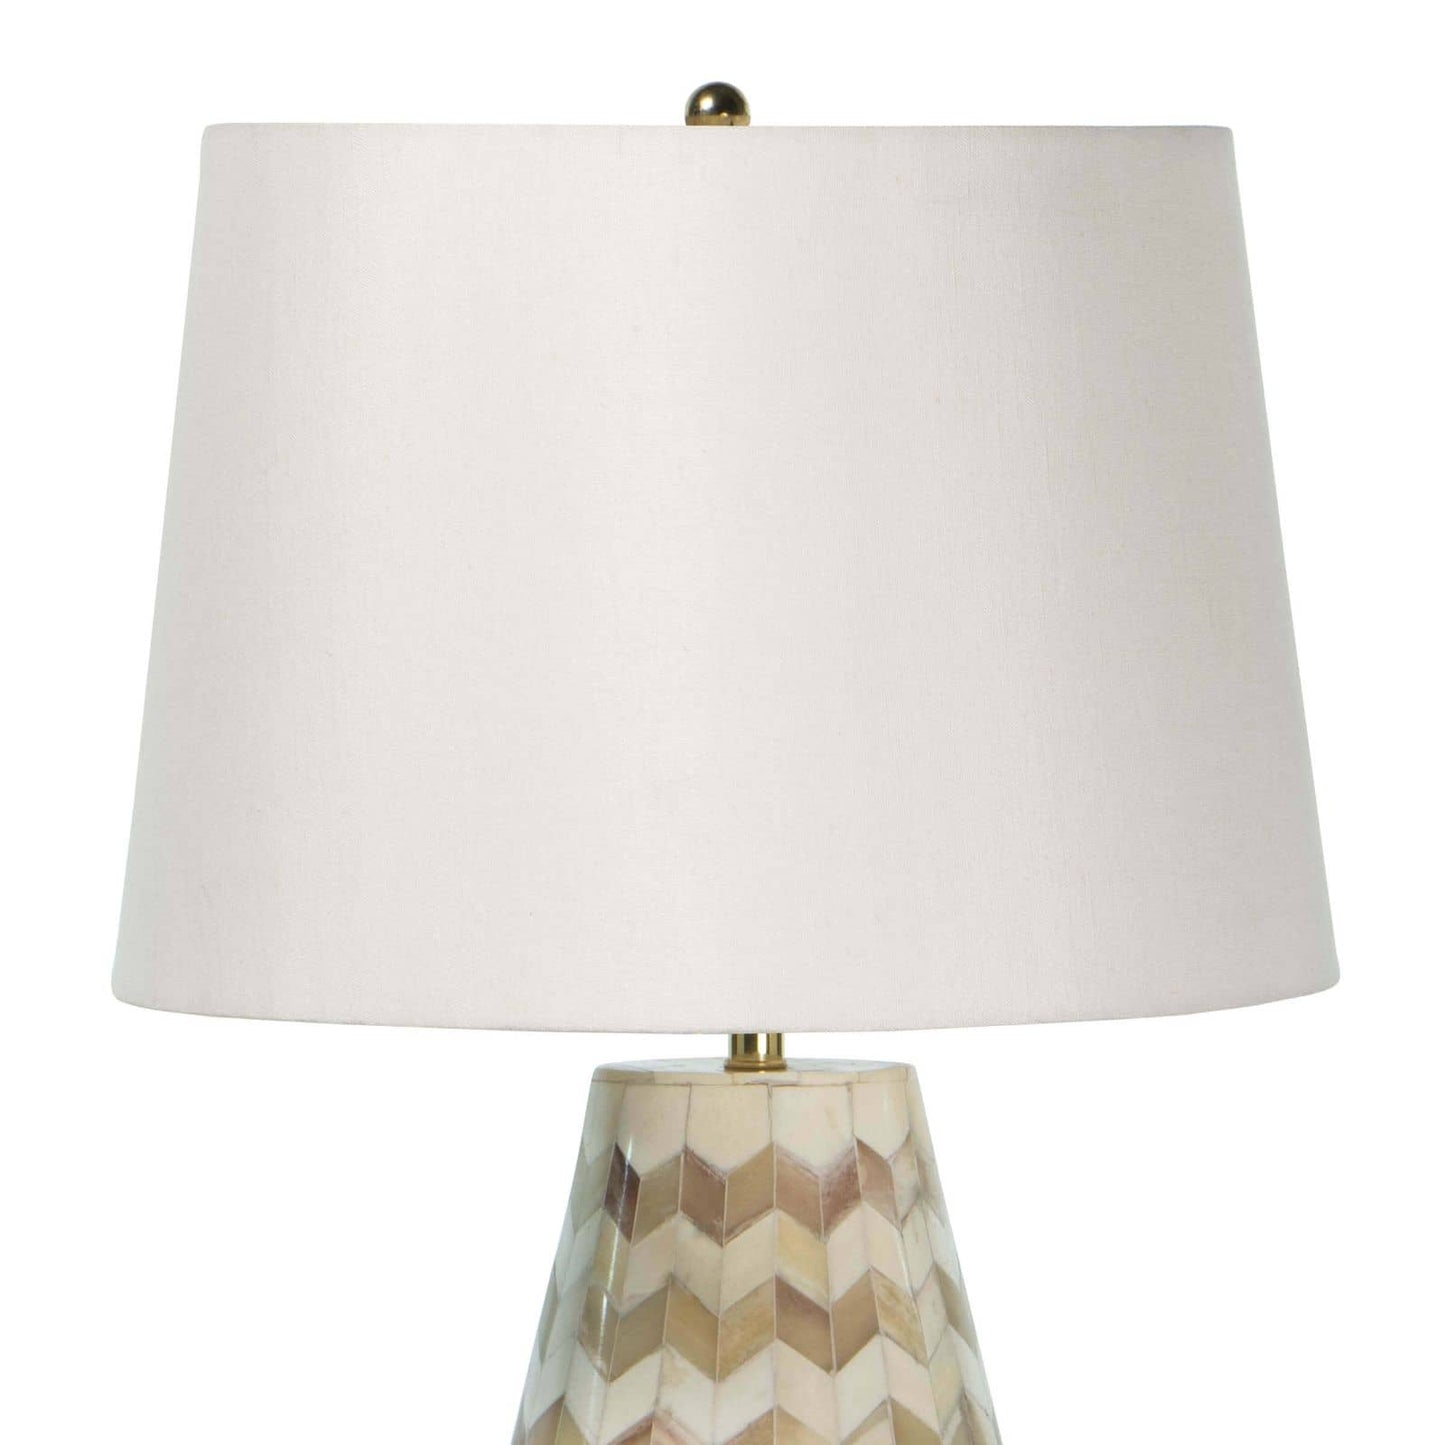 Cassia Chevron Table Lamp in Natural by Regina Andrew